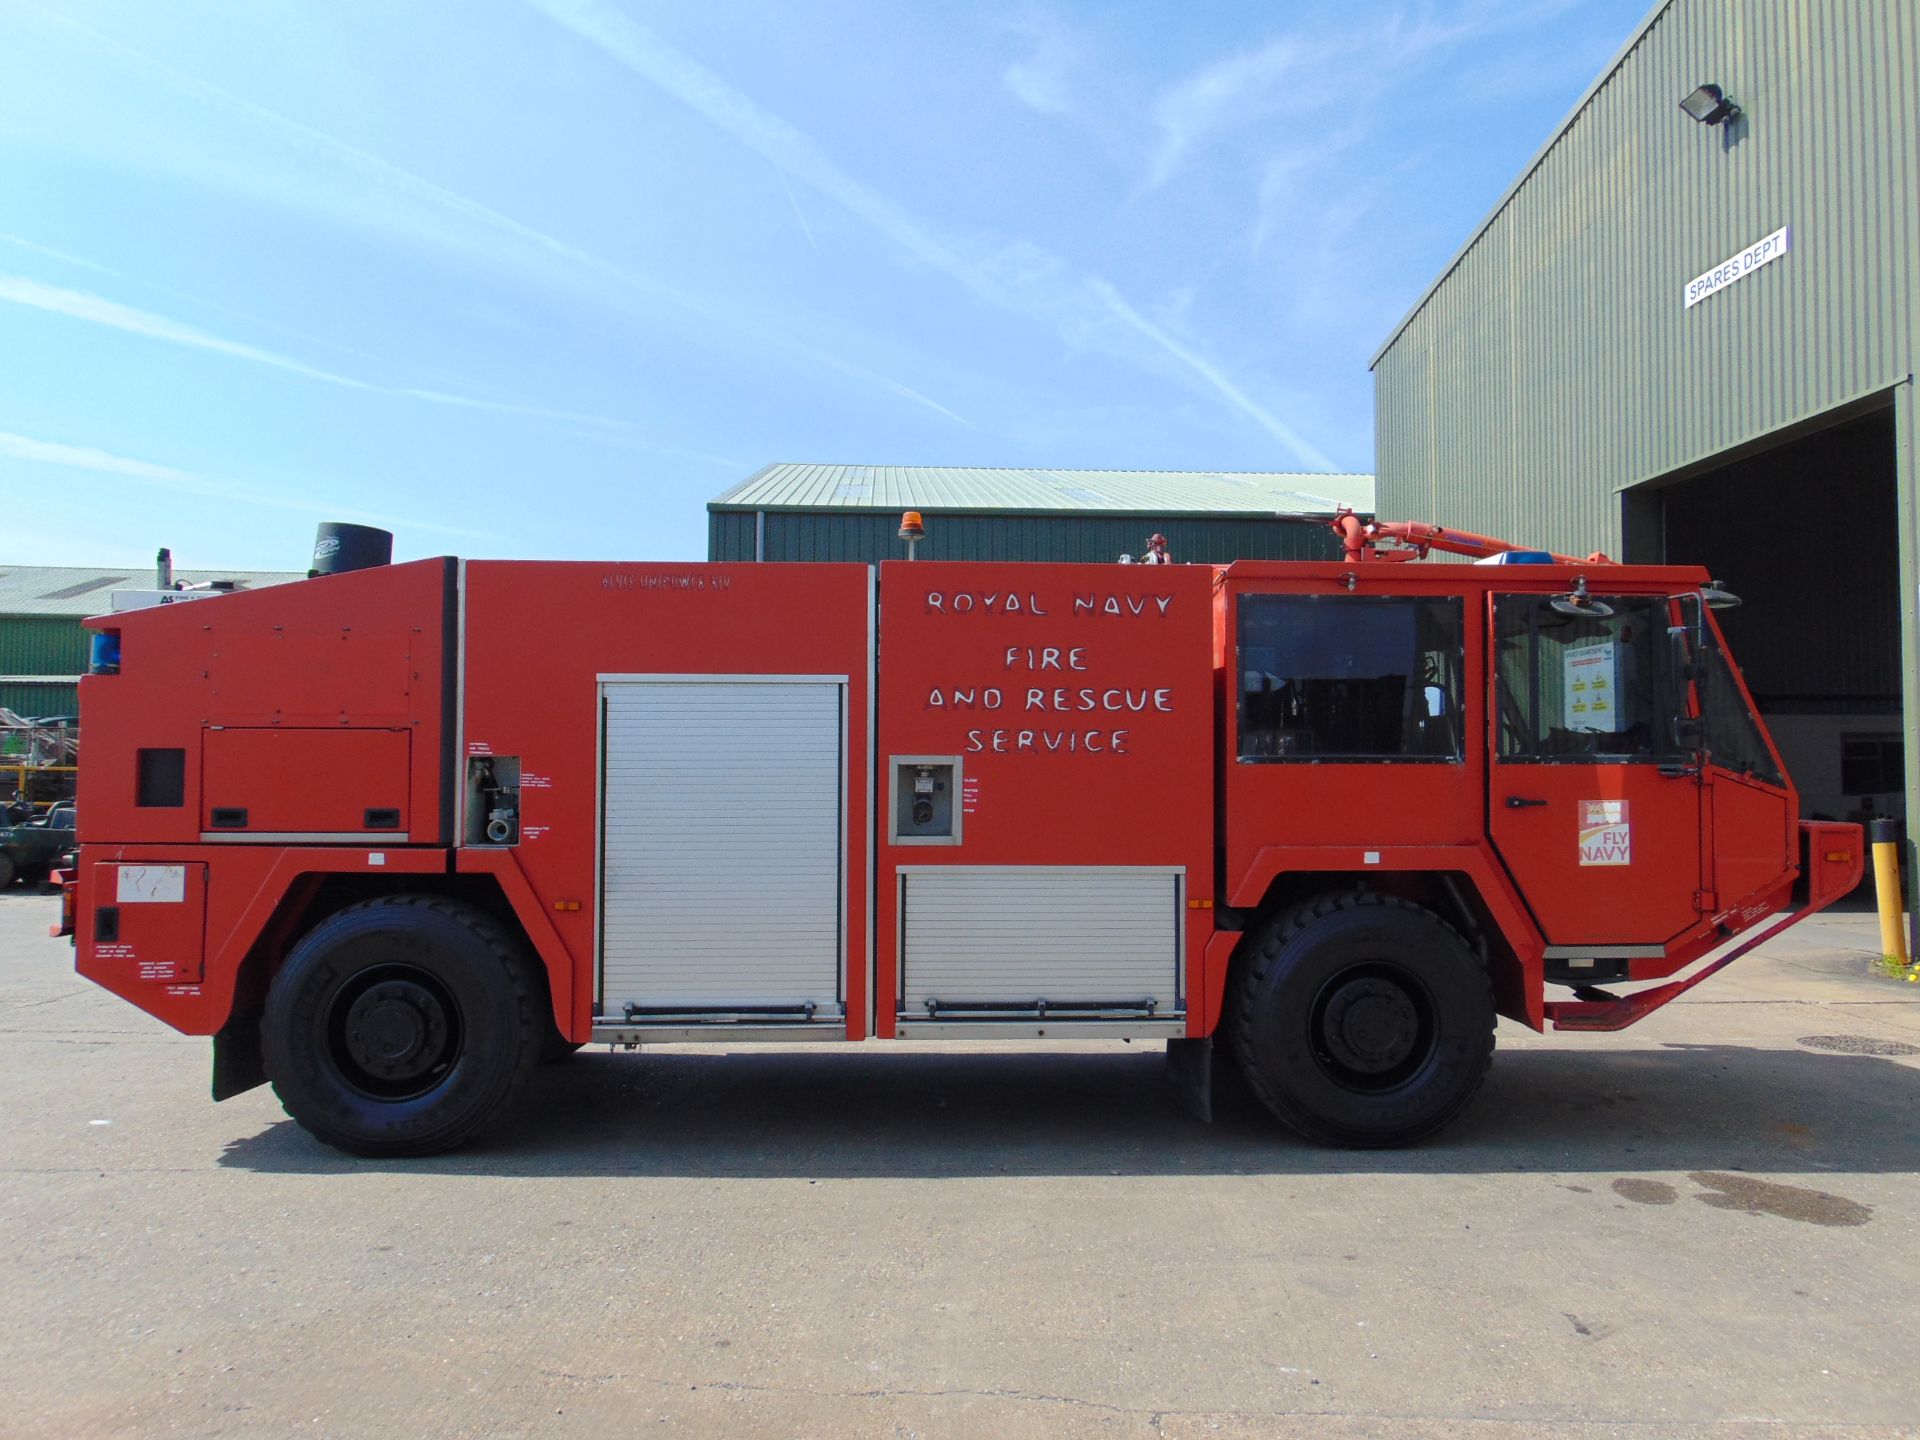 Unipower 4 x 4 Airport Fire Fighting Appliance - Rapid Intervention Vehicle - Image 27 of 73